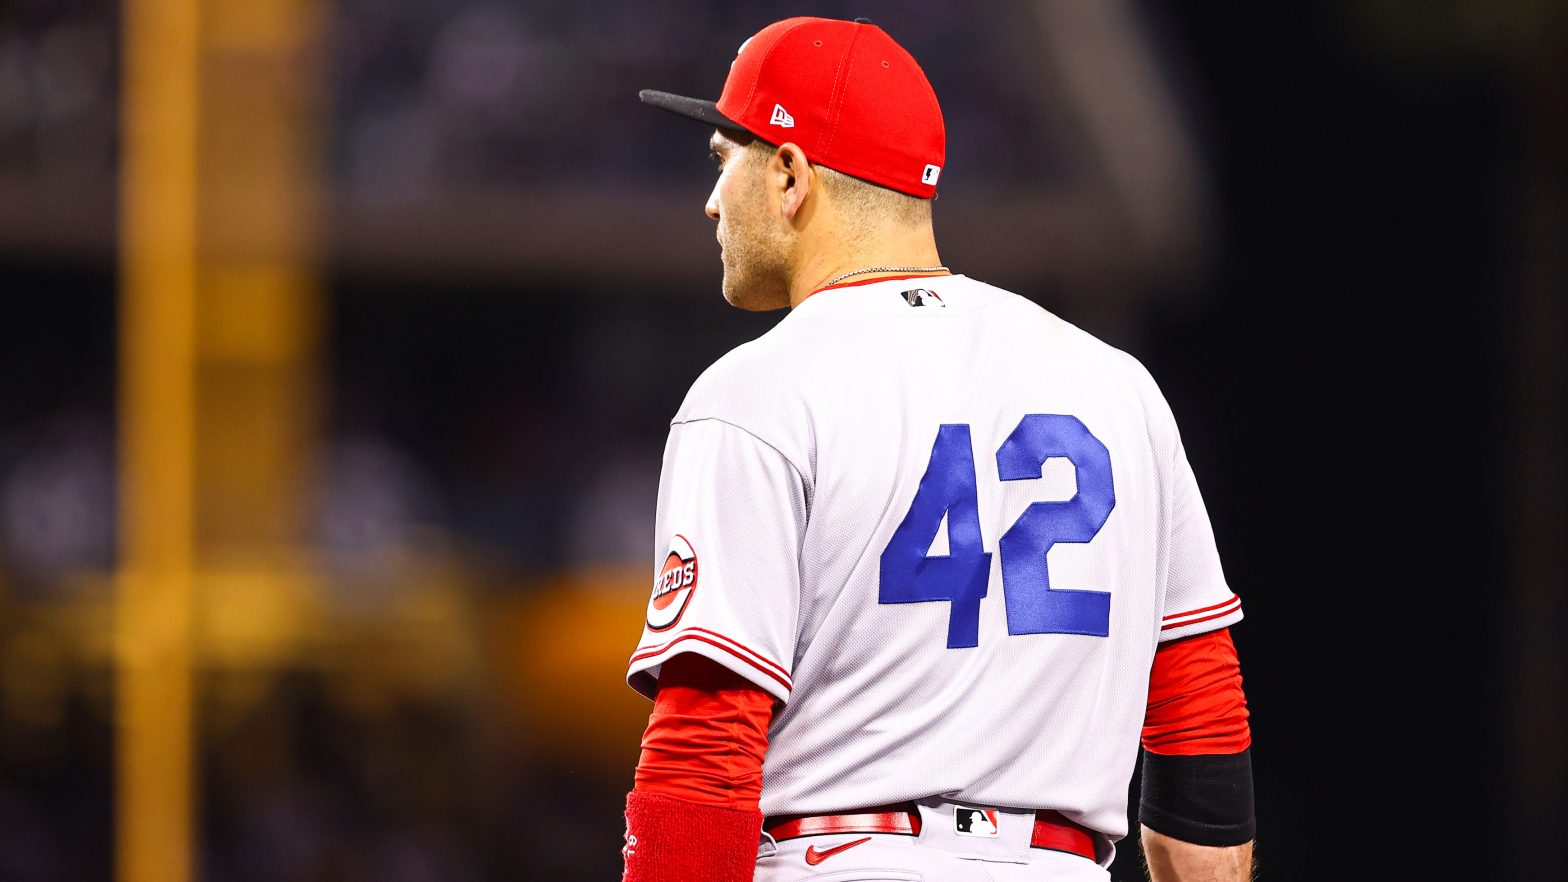 Why is Jackie Robinson Day celebrated on April 15? The reason MLB players wear 42